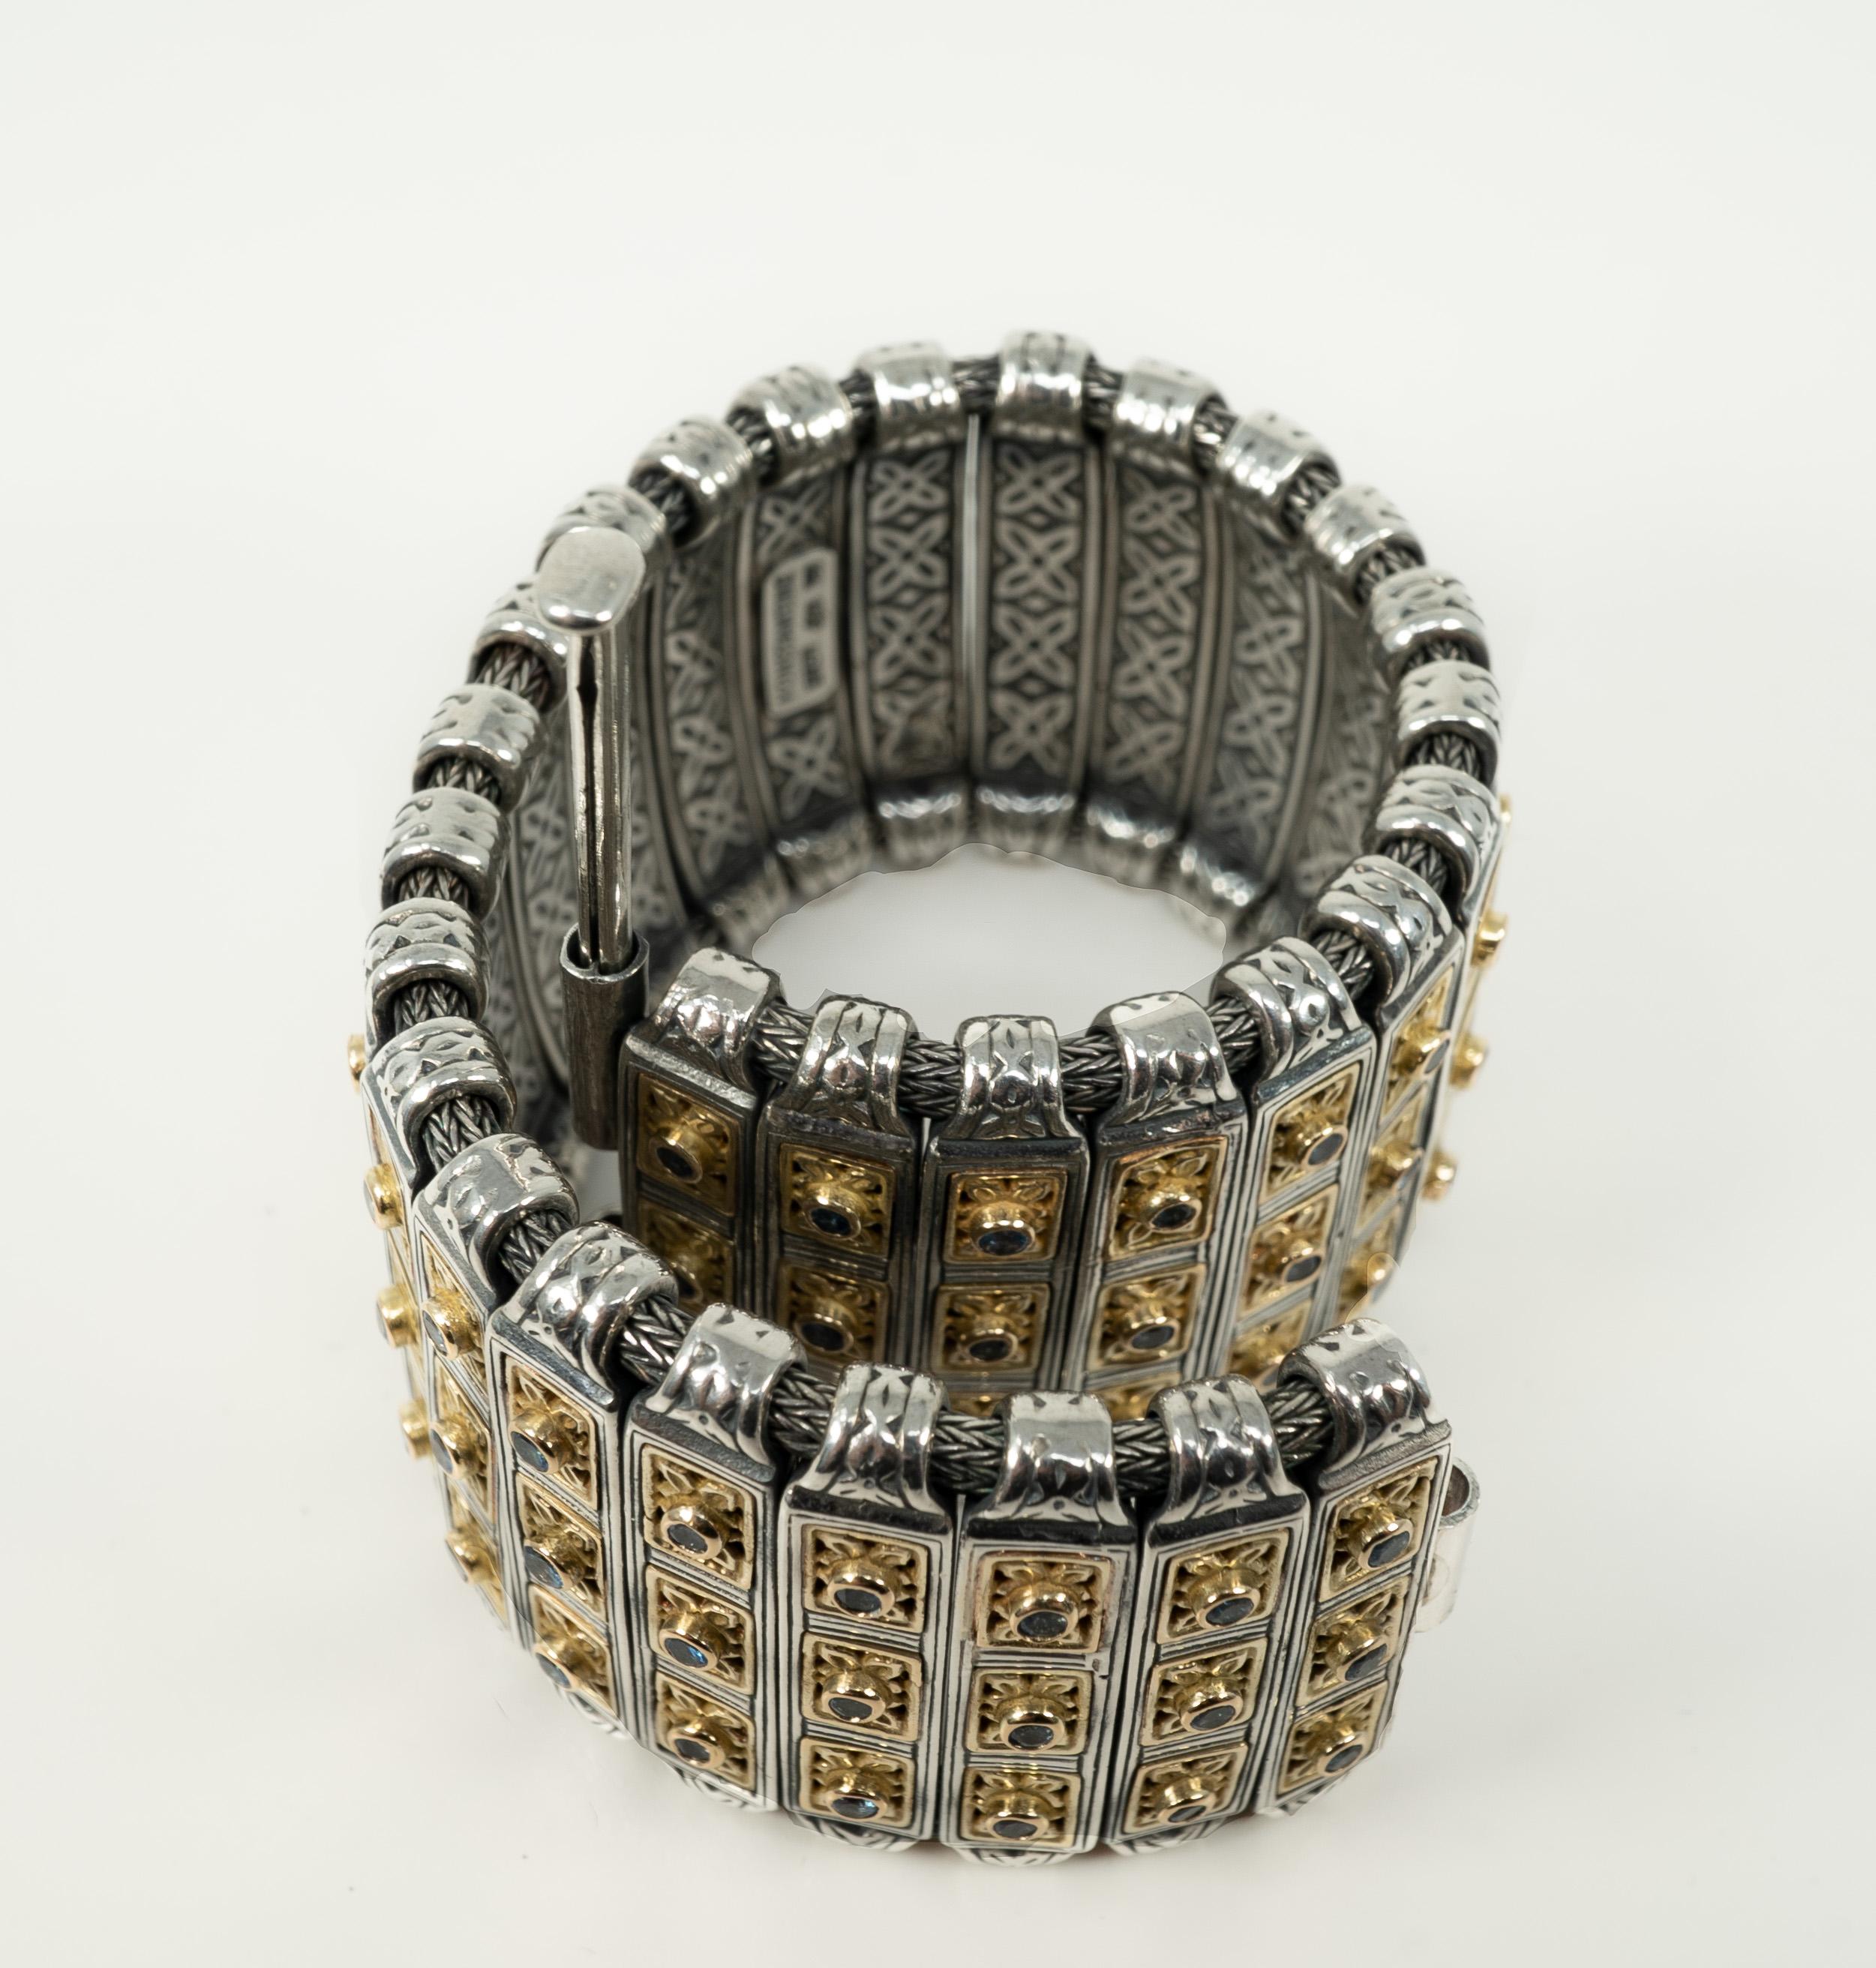 In sterling silver and 18 karat yellow gold, with sparkling blue stones, this classic Konstantino bracelet is lovely!

Please note length is approximate.